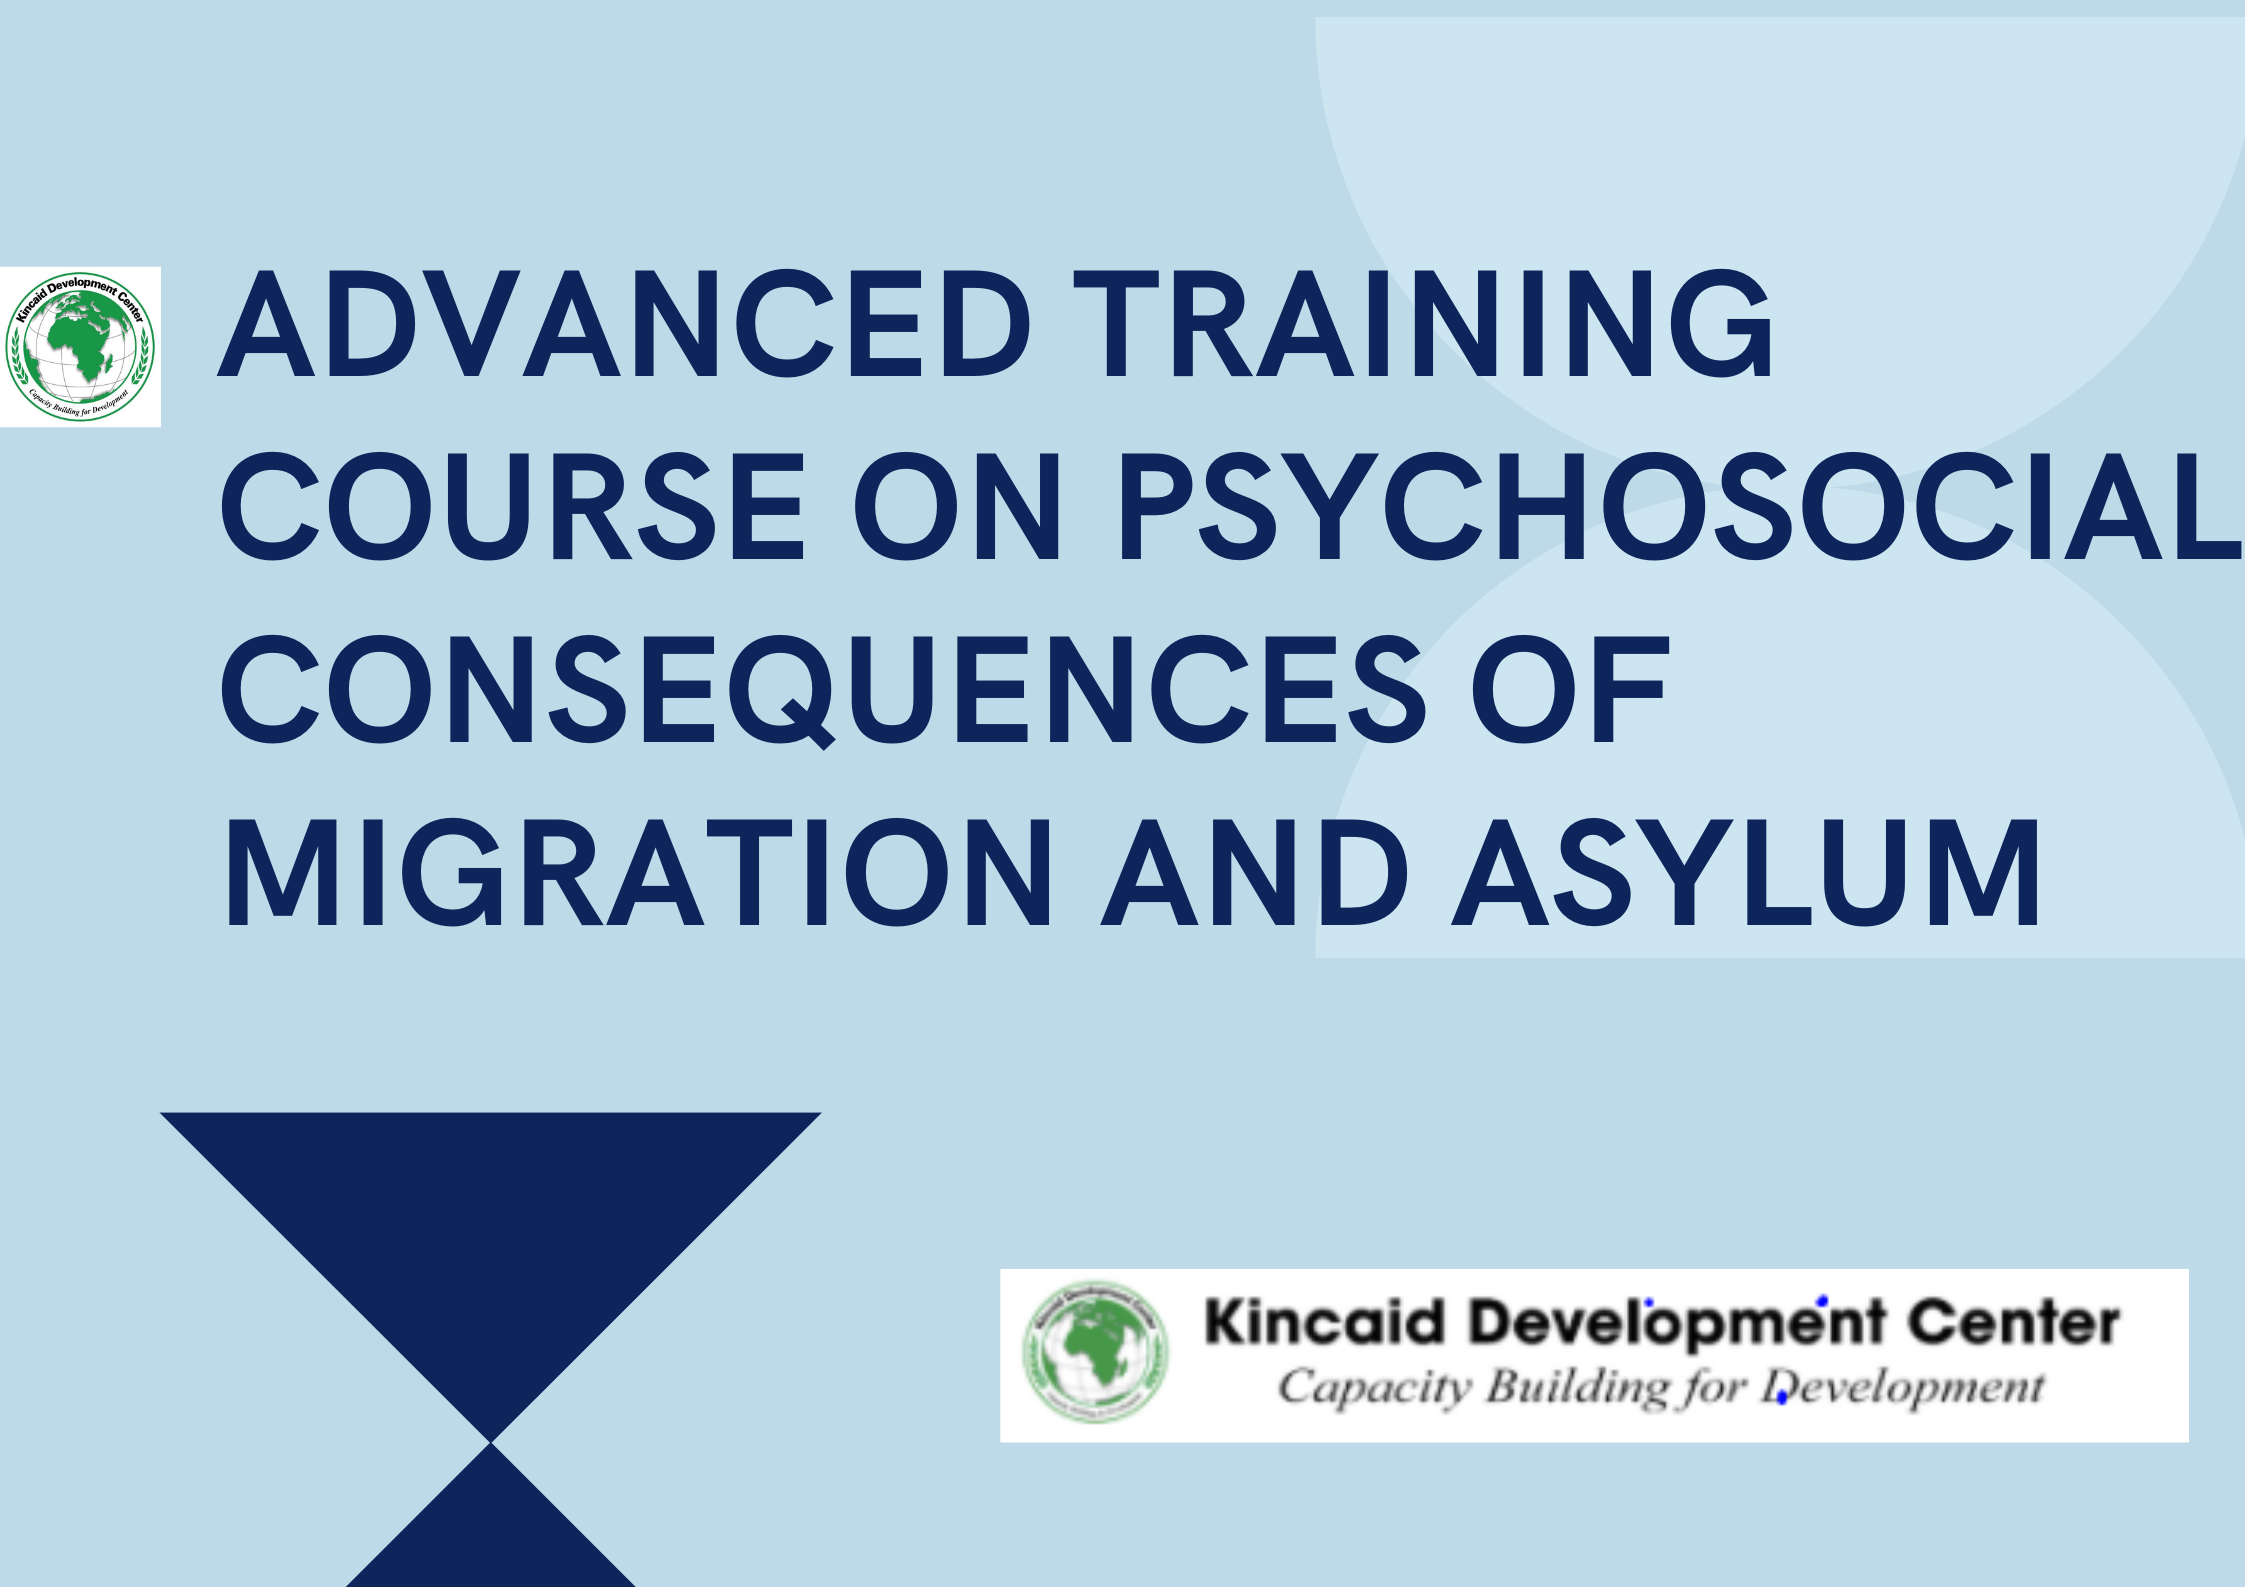 ADVANCED TRAINING COURSE ON PSYCHOSOCIAL CONSEQUENCES OF MIGRATION AND ASYLUM, Nairobi, Kenya